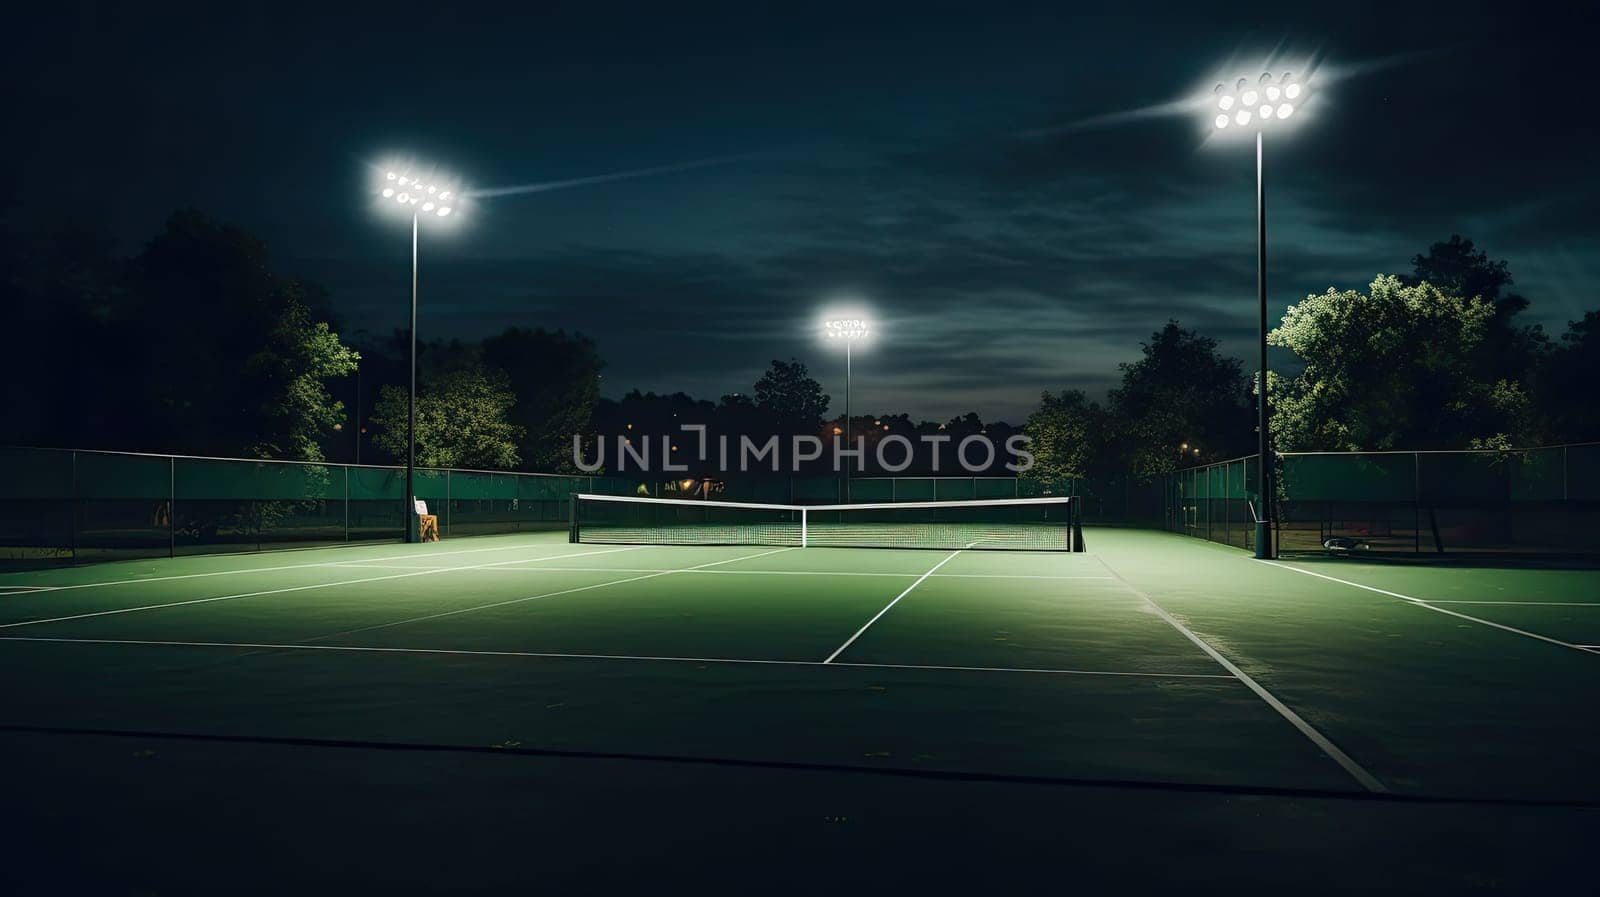 View of a tennis court with light from the spotlights over dark background by natali_brill